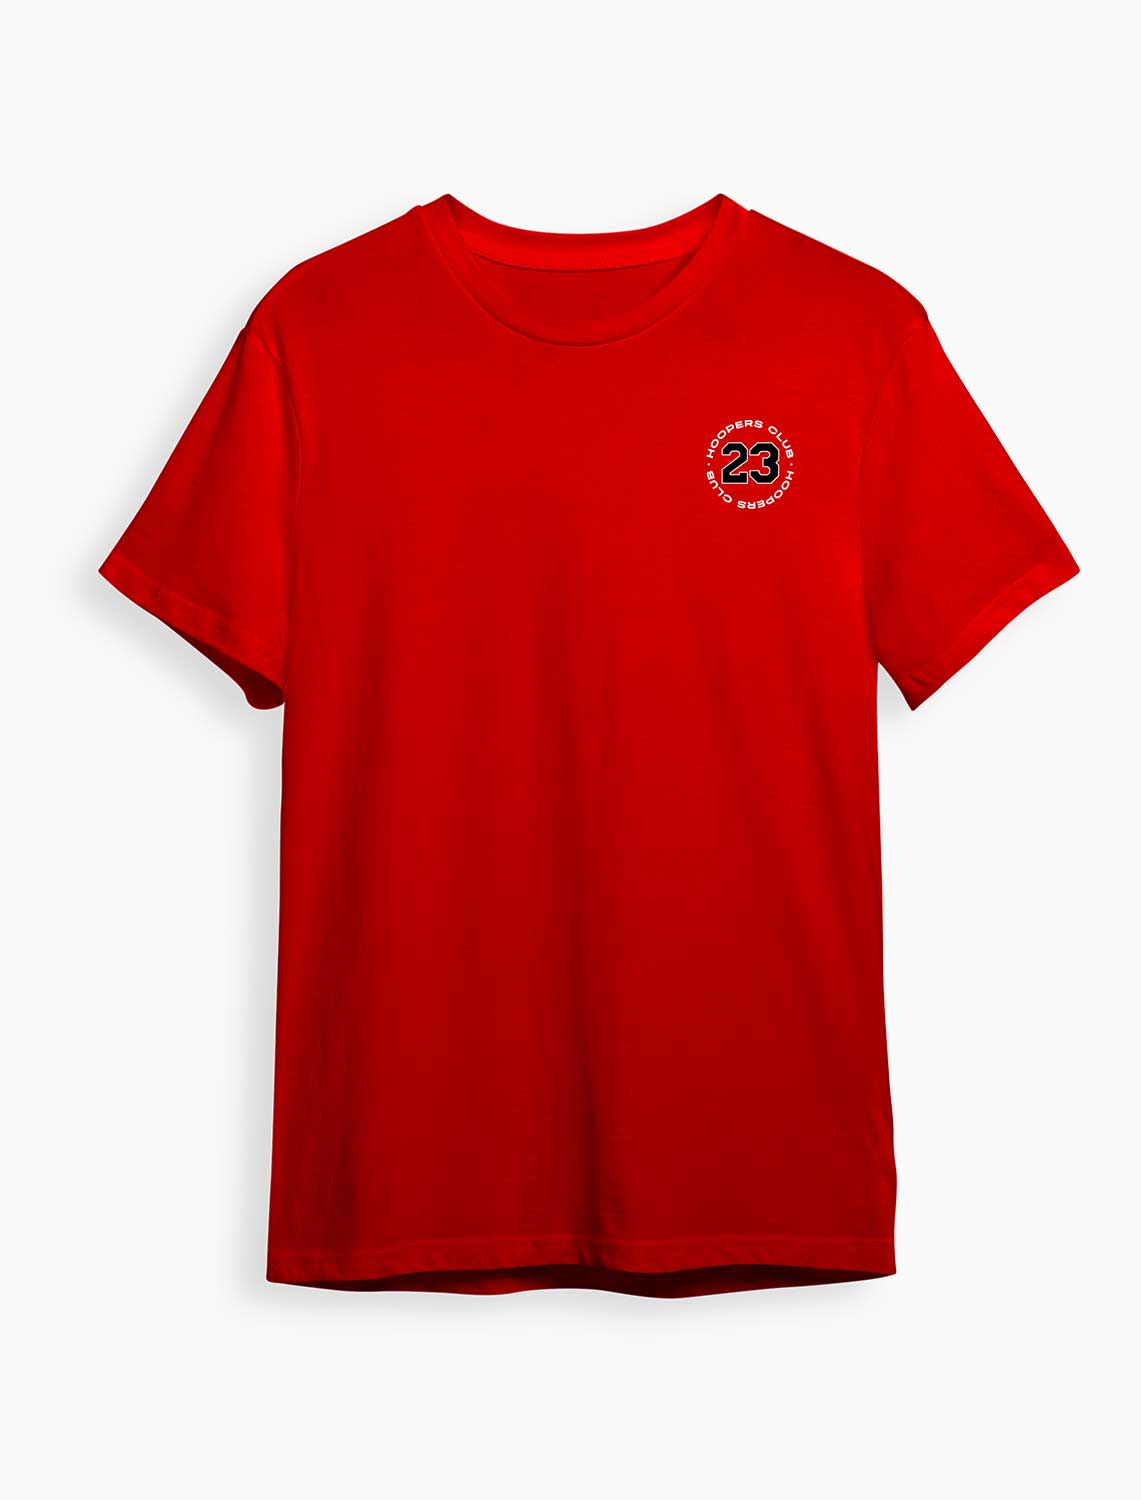 T-Shirt Hoopers x 23 Red